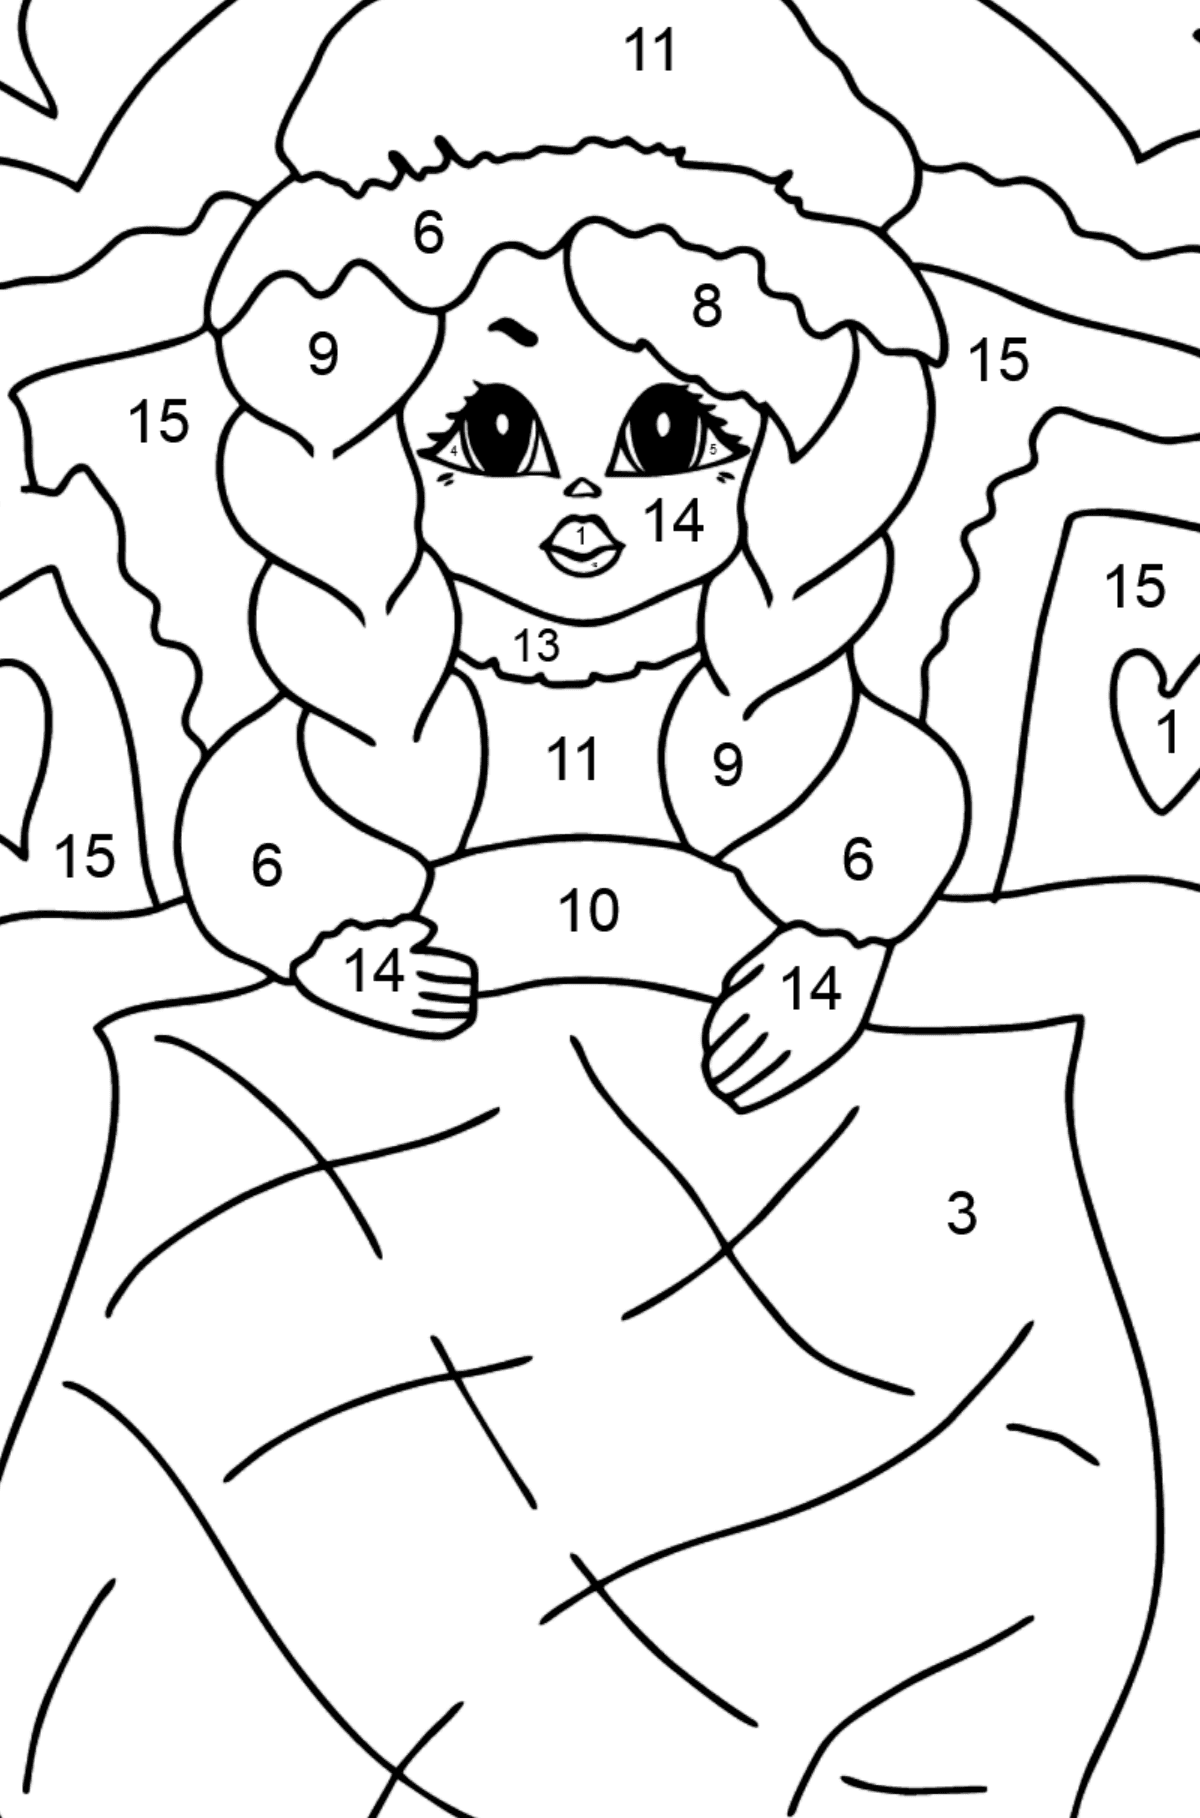 Coloring Page - A Princess in Bed - Coloring by Numbers for Kids